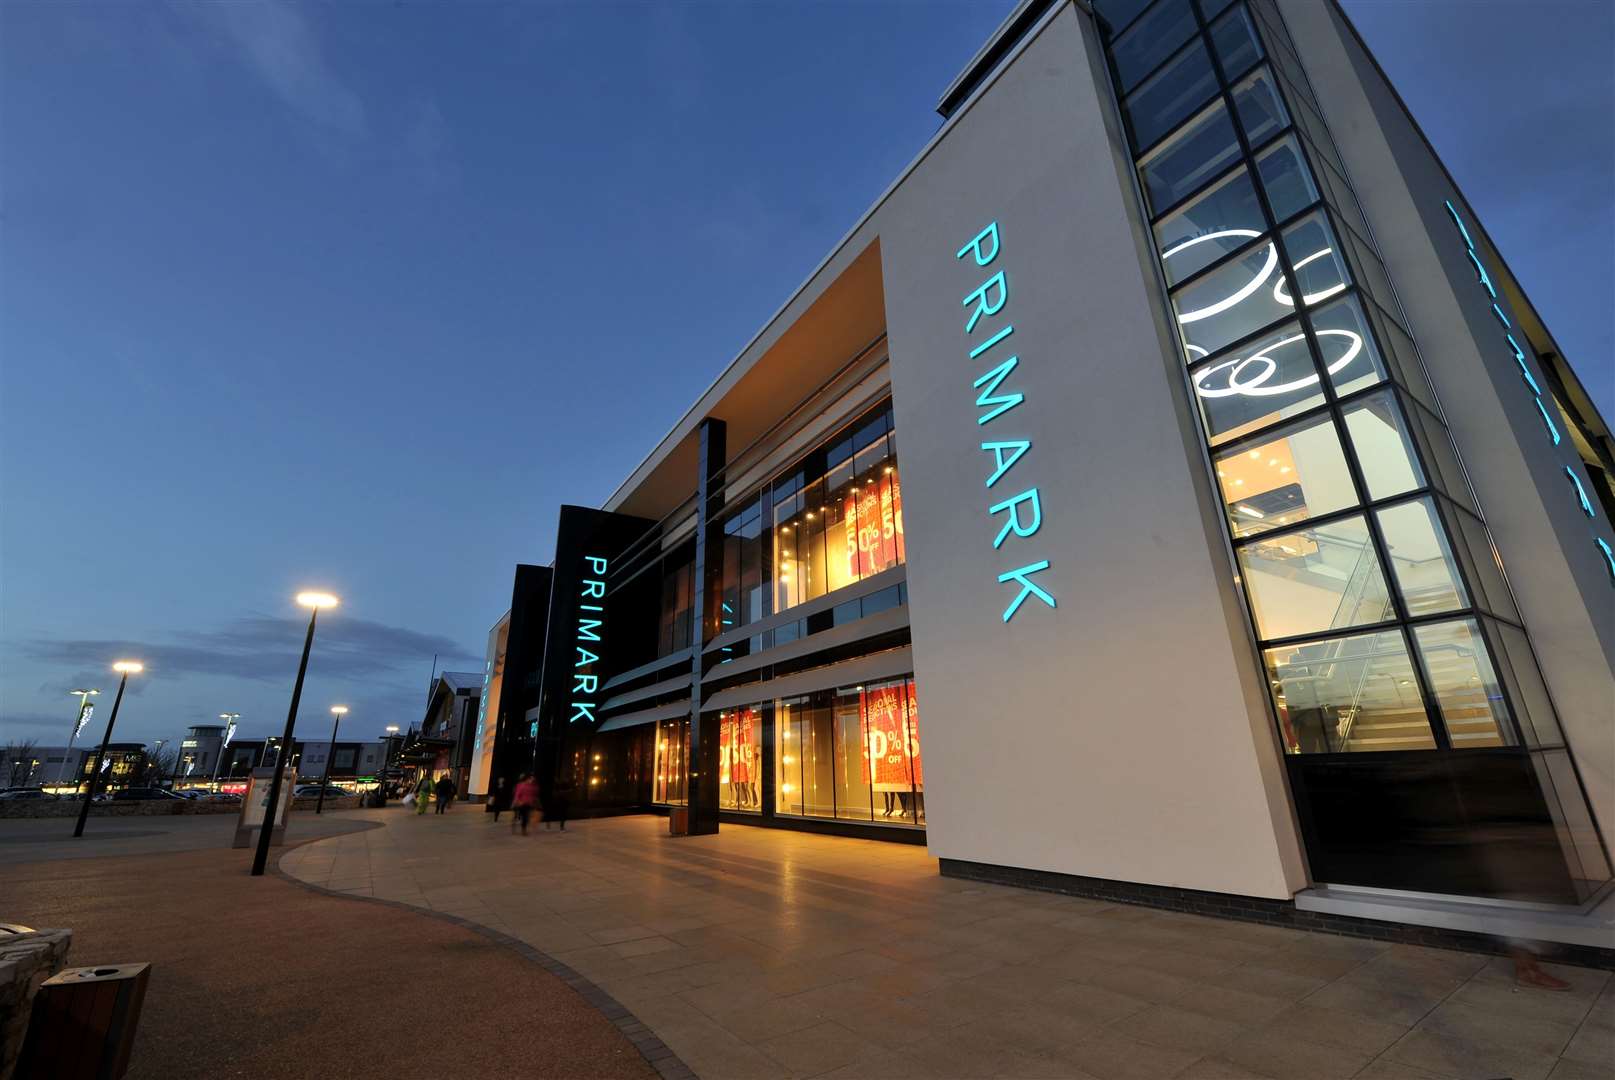 Primark and John Lewis have laid bare problems staff face with shoplifting and anti-social behaviour